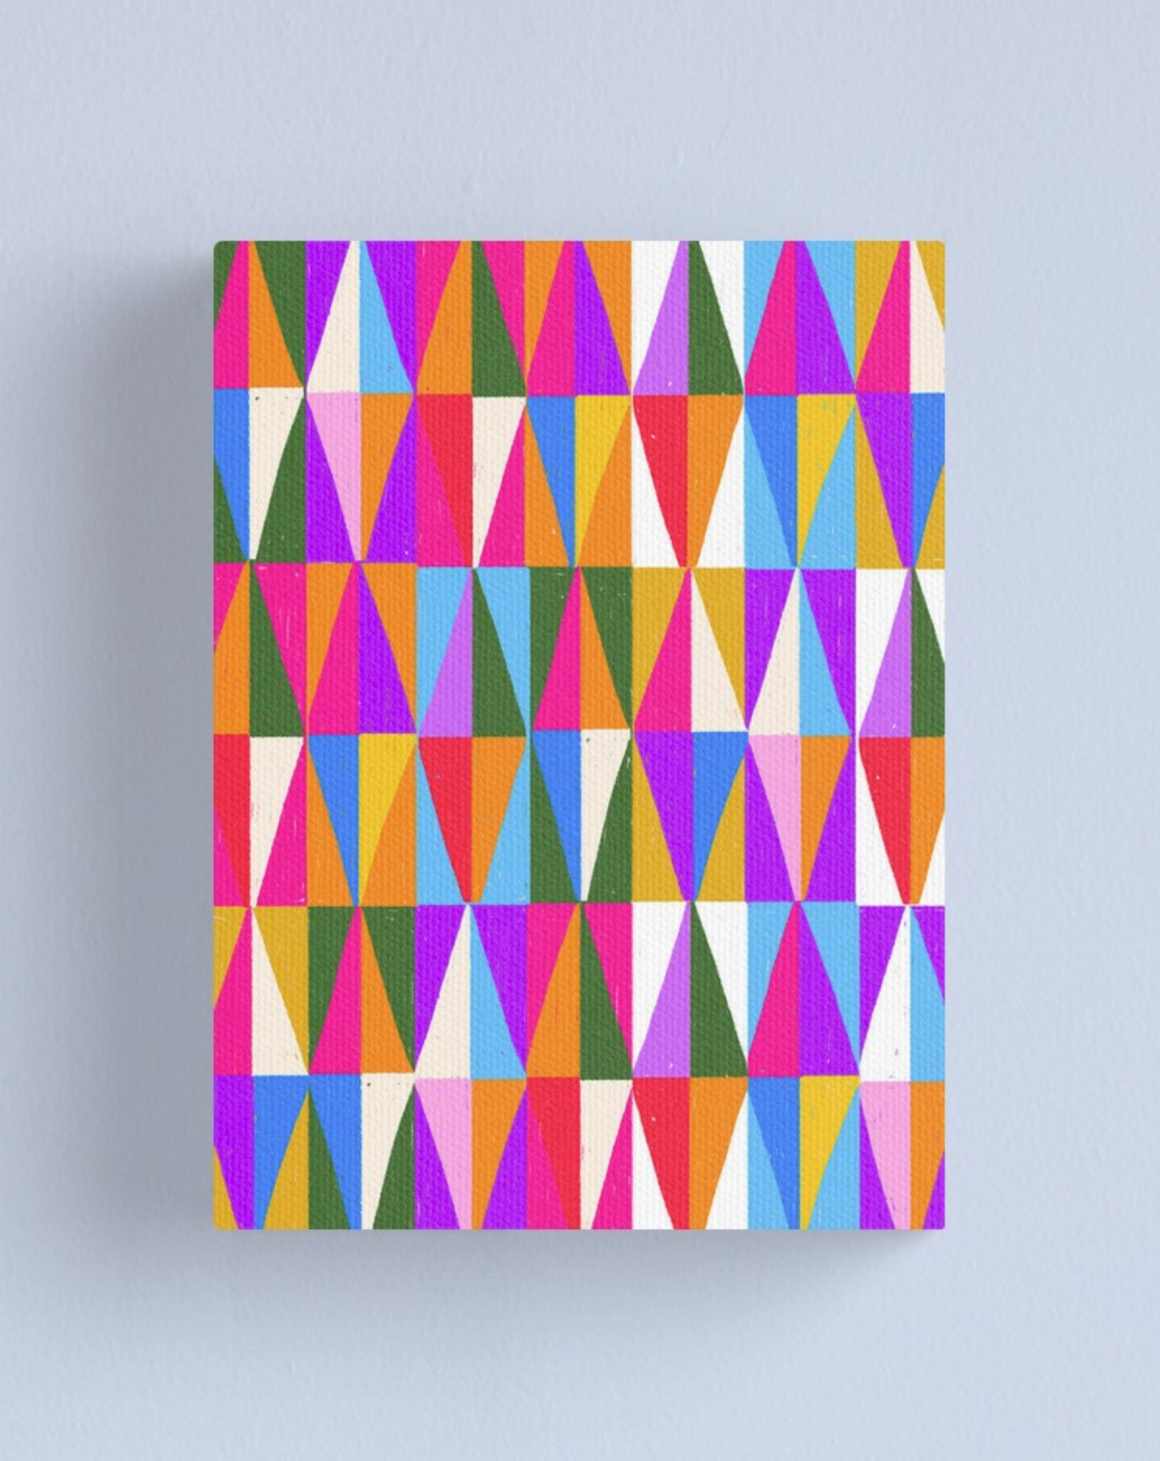 Geometric shapes - abstract illustration Canvas Print